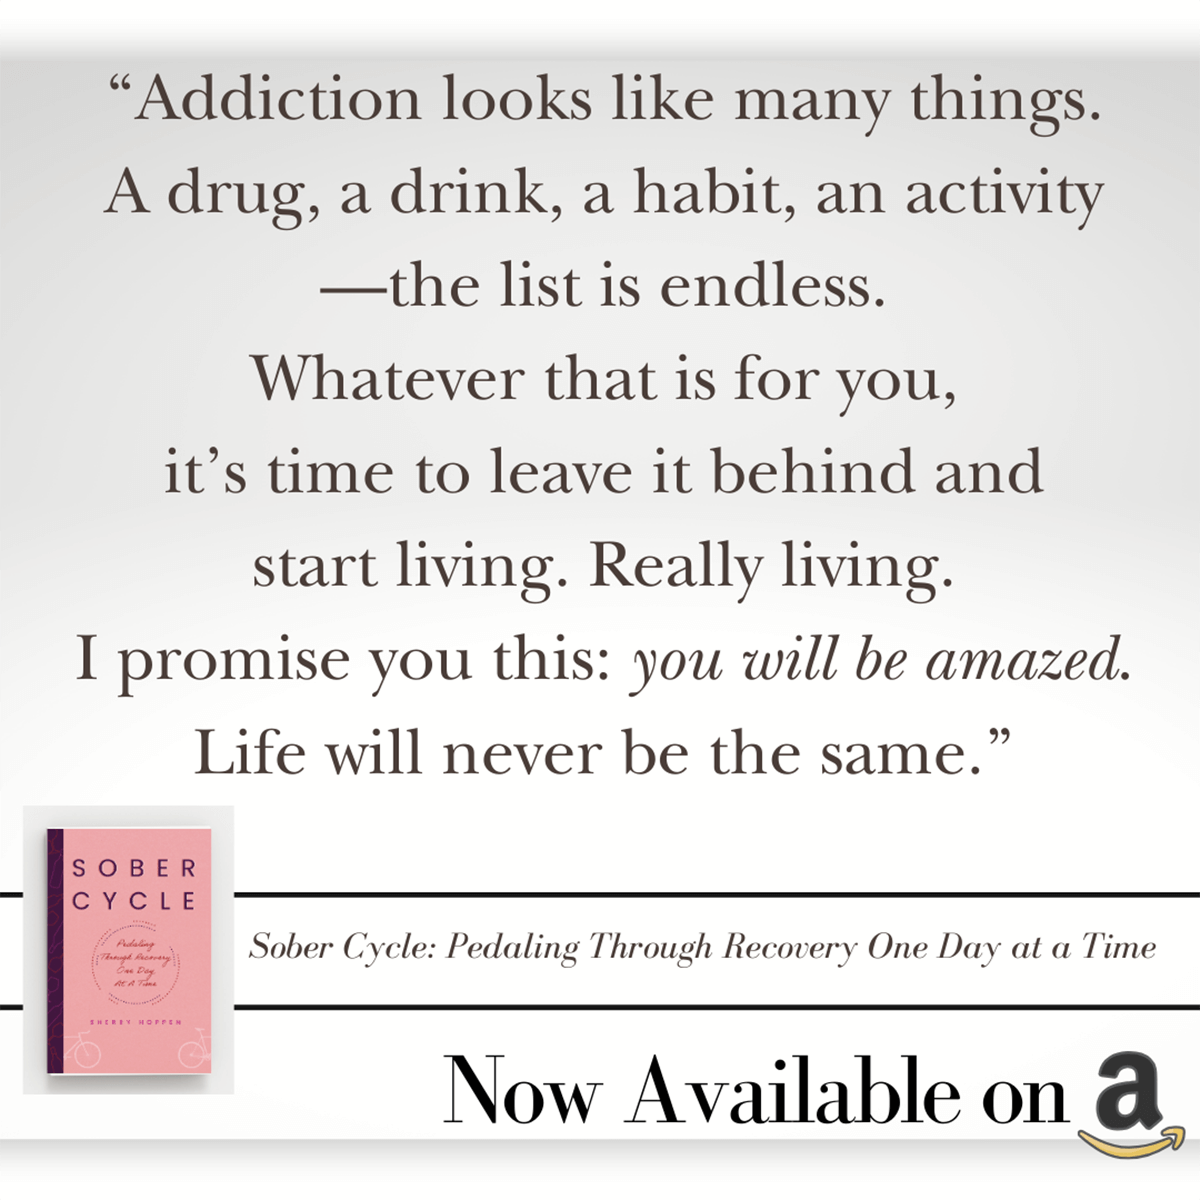 Quote from Sober Cycle "Addiction looks like many things. A drug, a drink, a habit, and activity - the list is endless. Whatever that is for you, it's time to leave it behind and start living. Really living. I promise you this: you will be amazed. Life will never be the same."